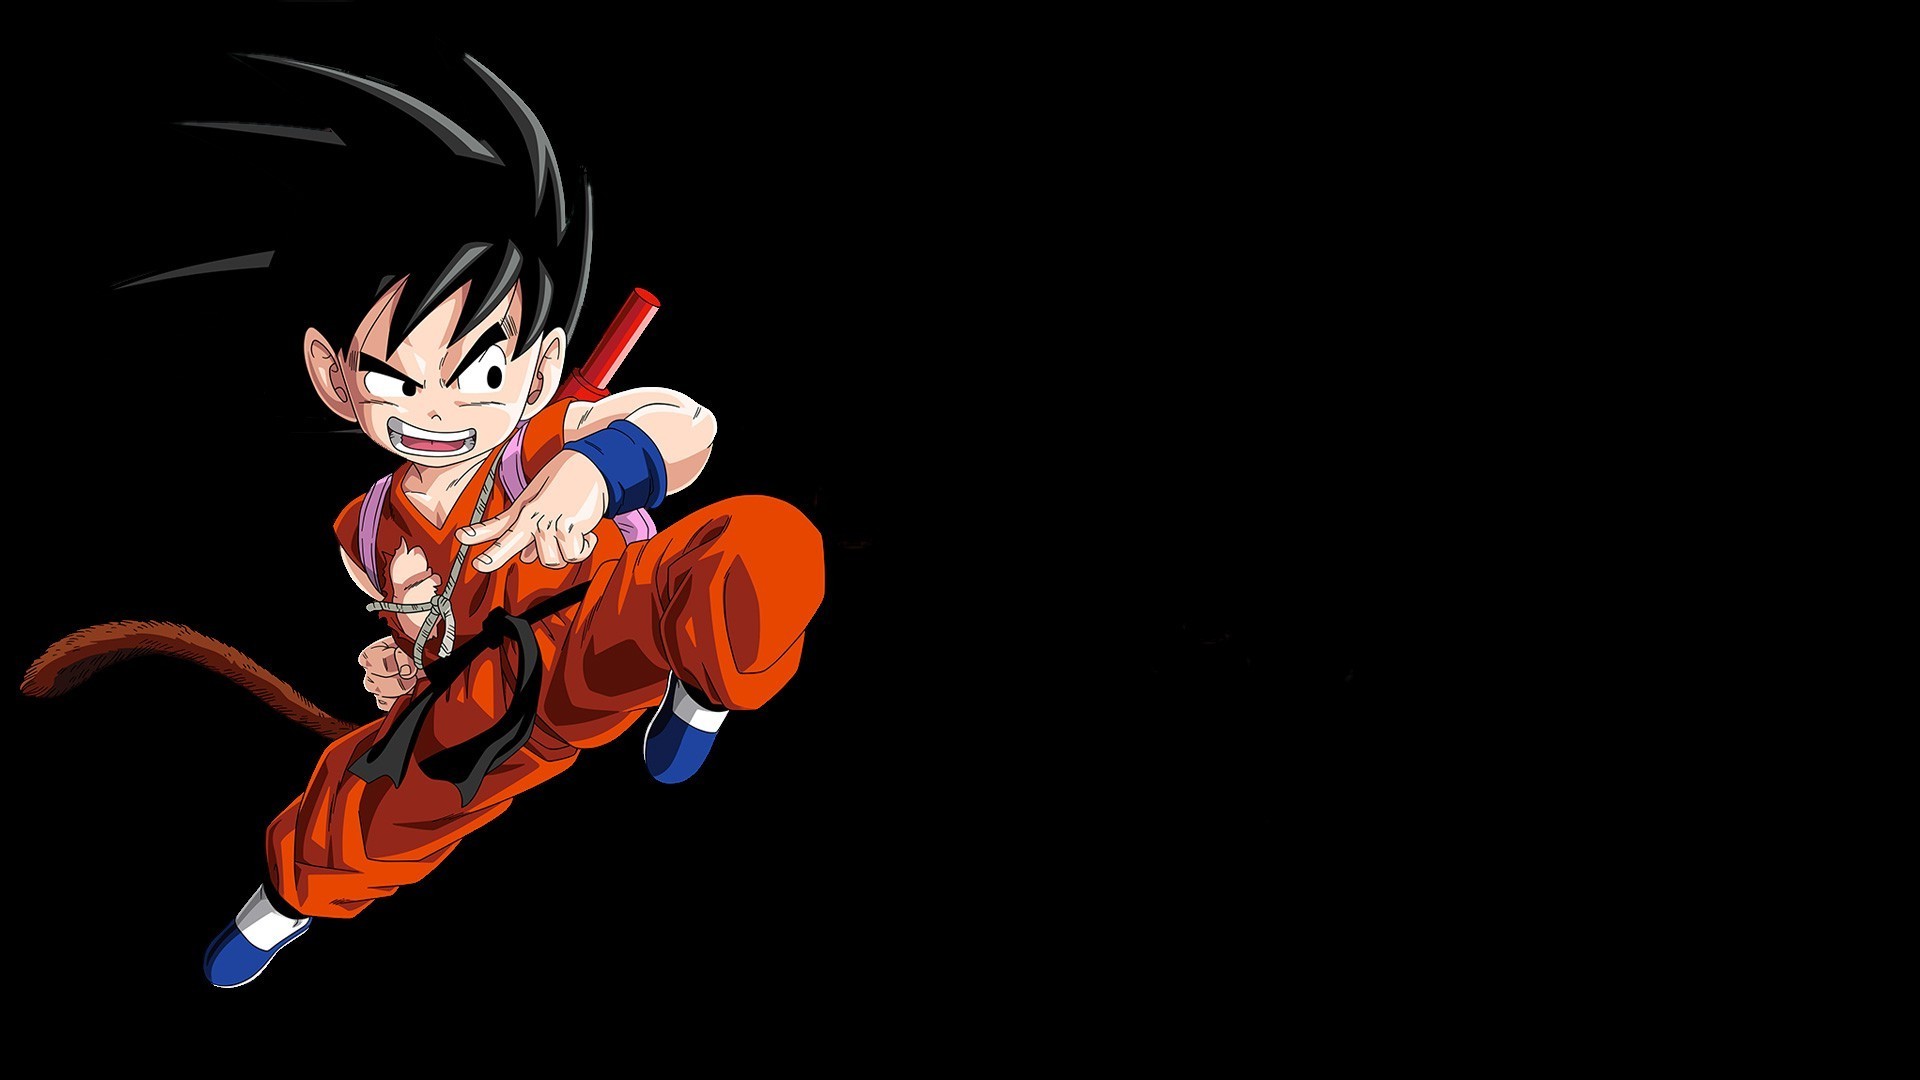 Kid Goku HD Backgrounds with image resolution 1920x1080 pixel. You can make this wallpaper for your Desktop Computer Backgrounds, Mac Wallpapers, Android Lock screen or iPhone Screensavers